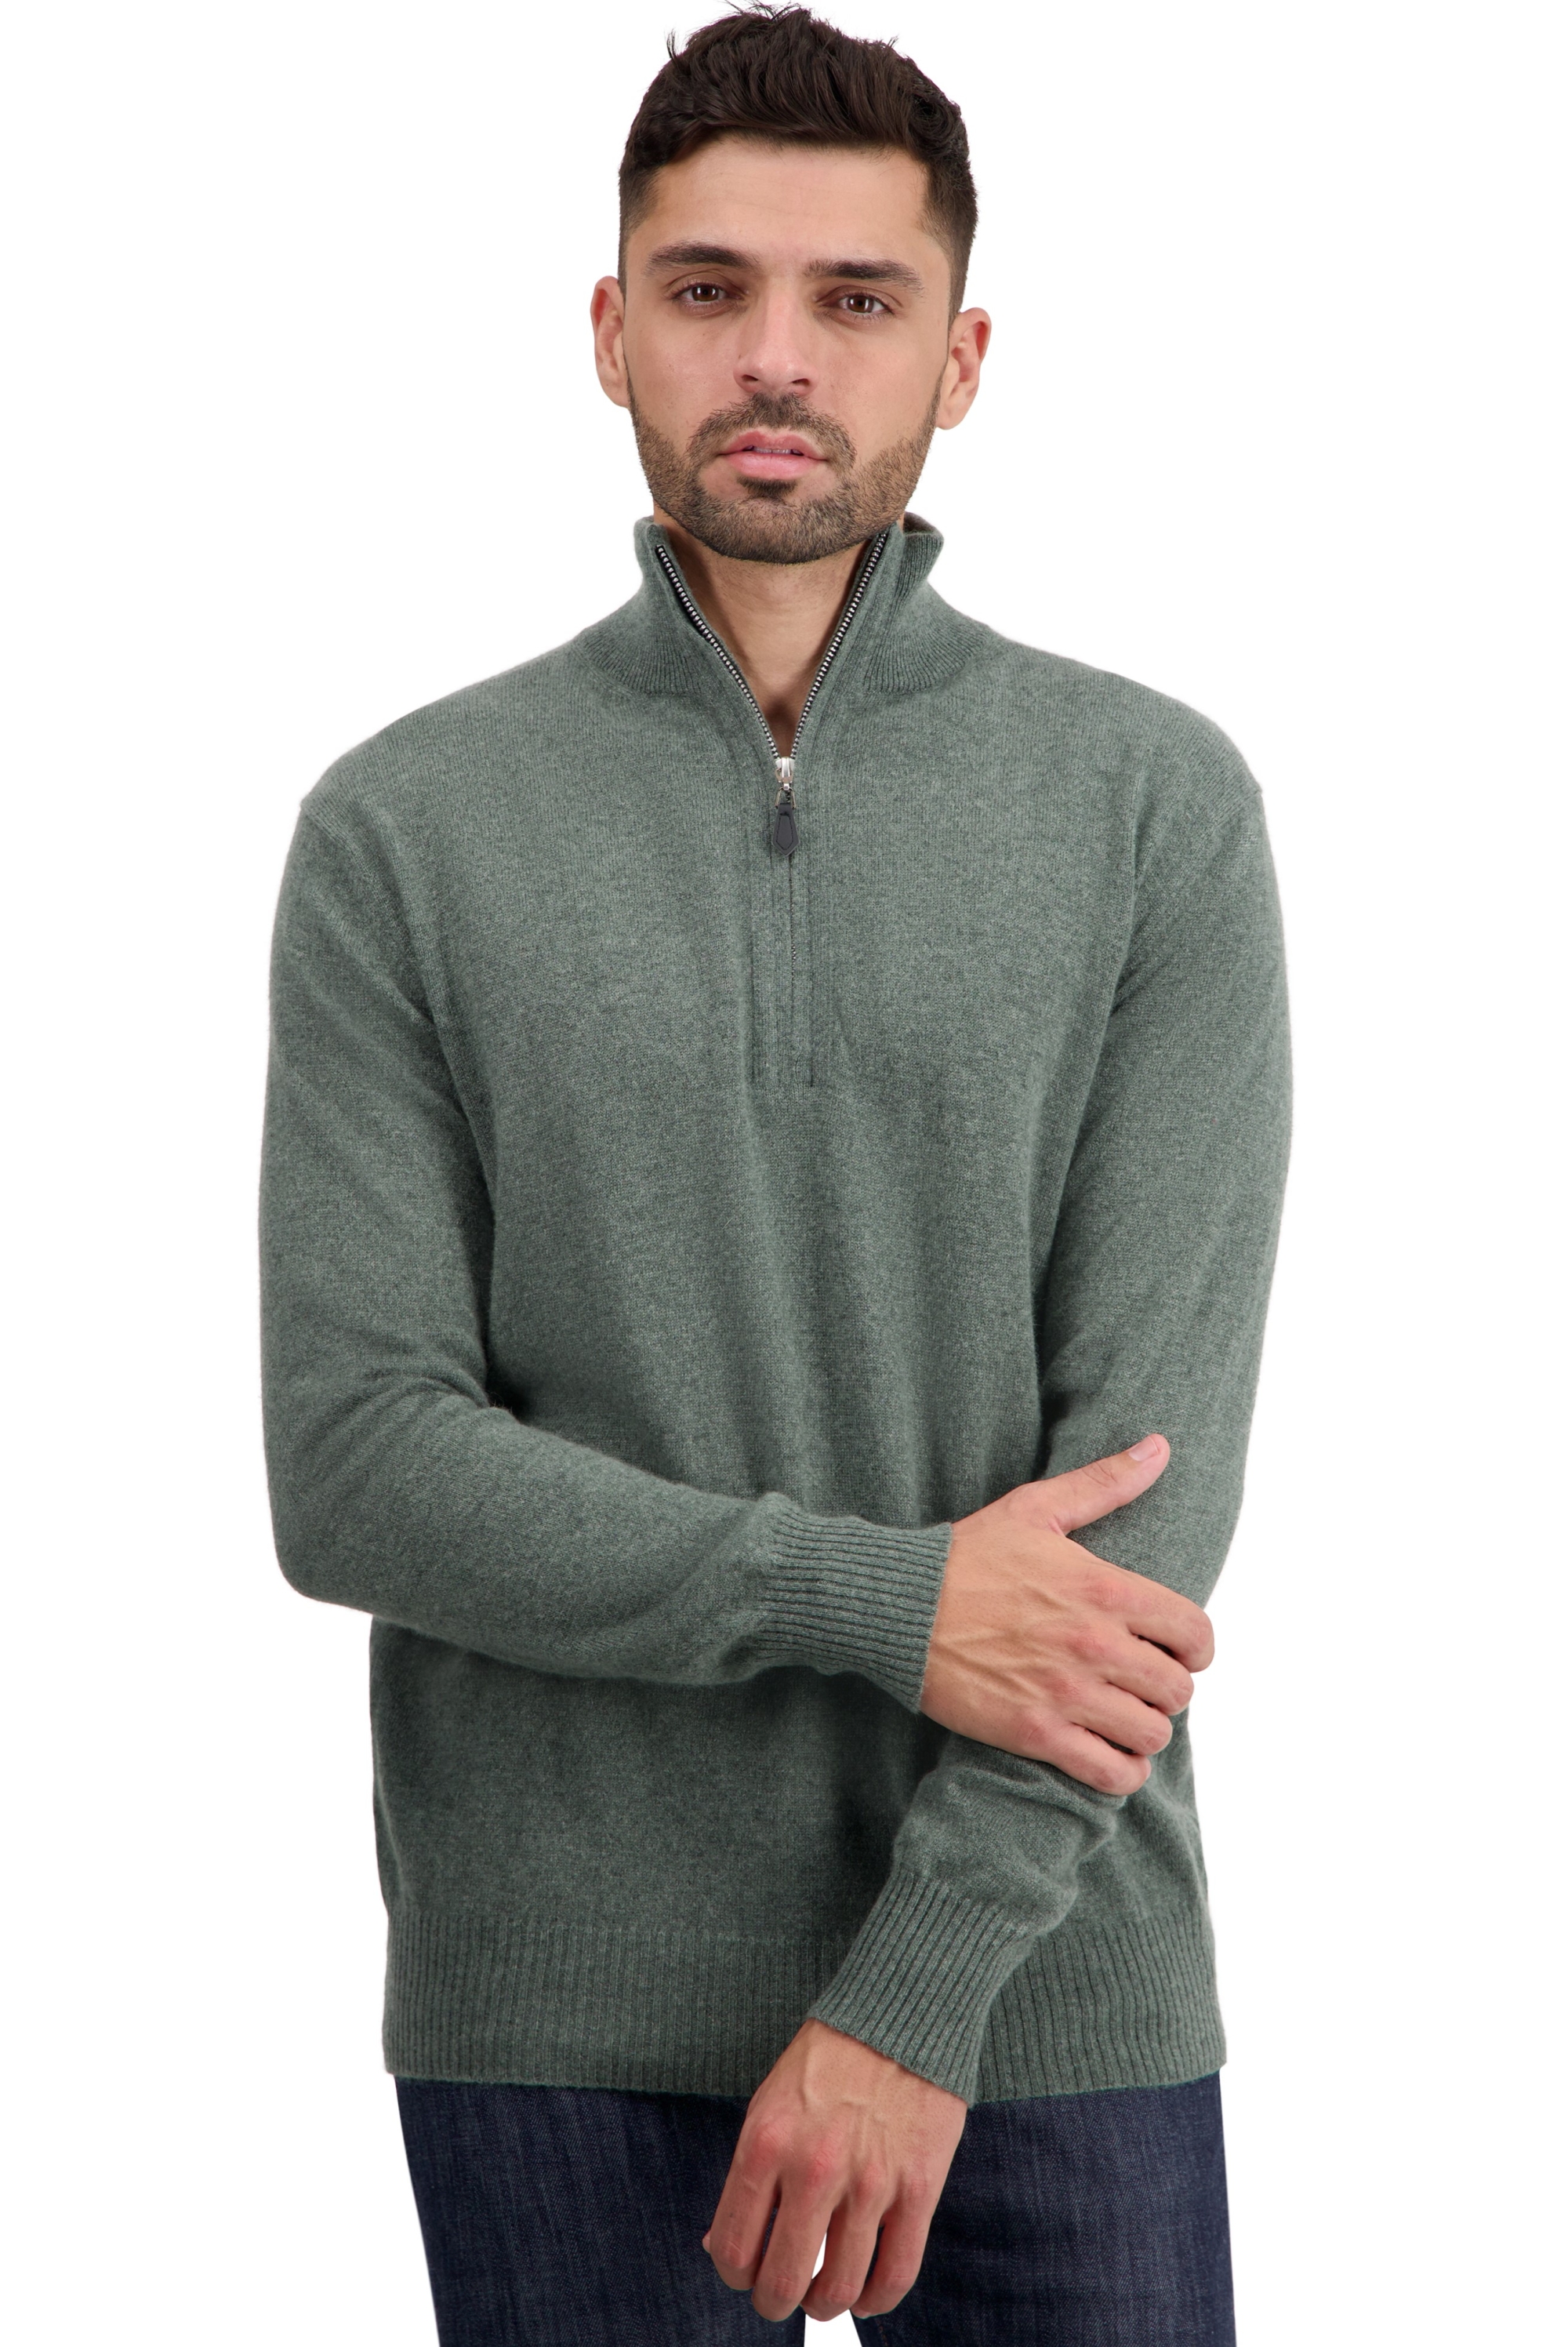 Cachemire pull homme toulon first military green l